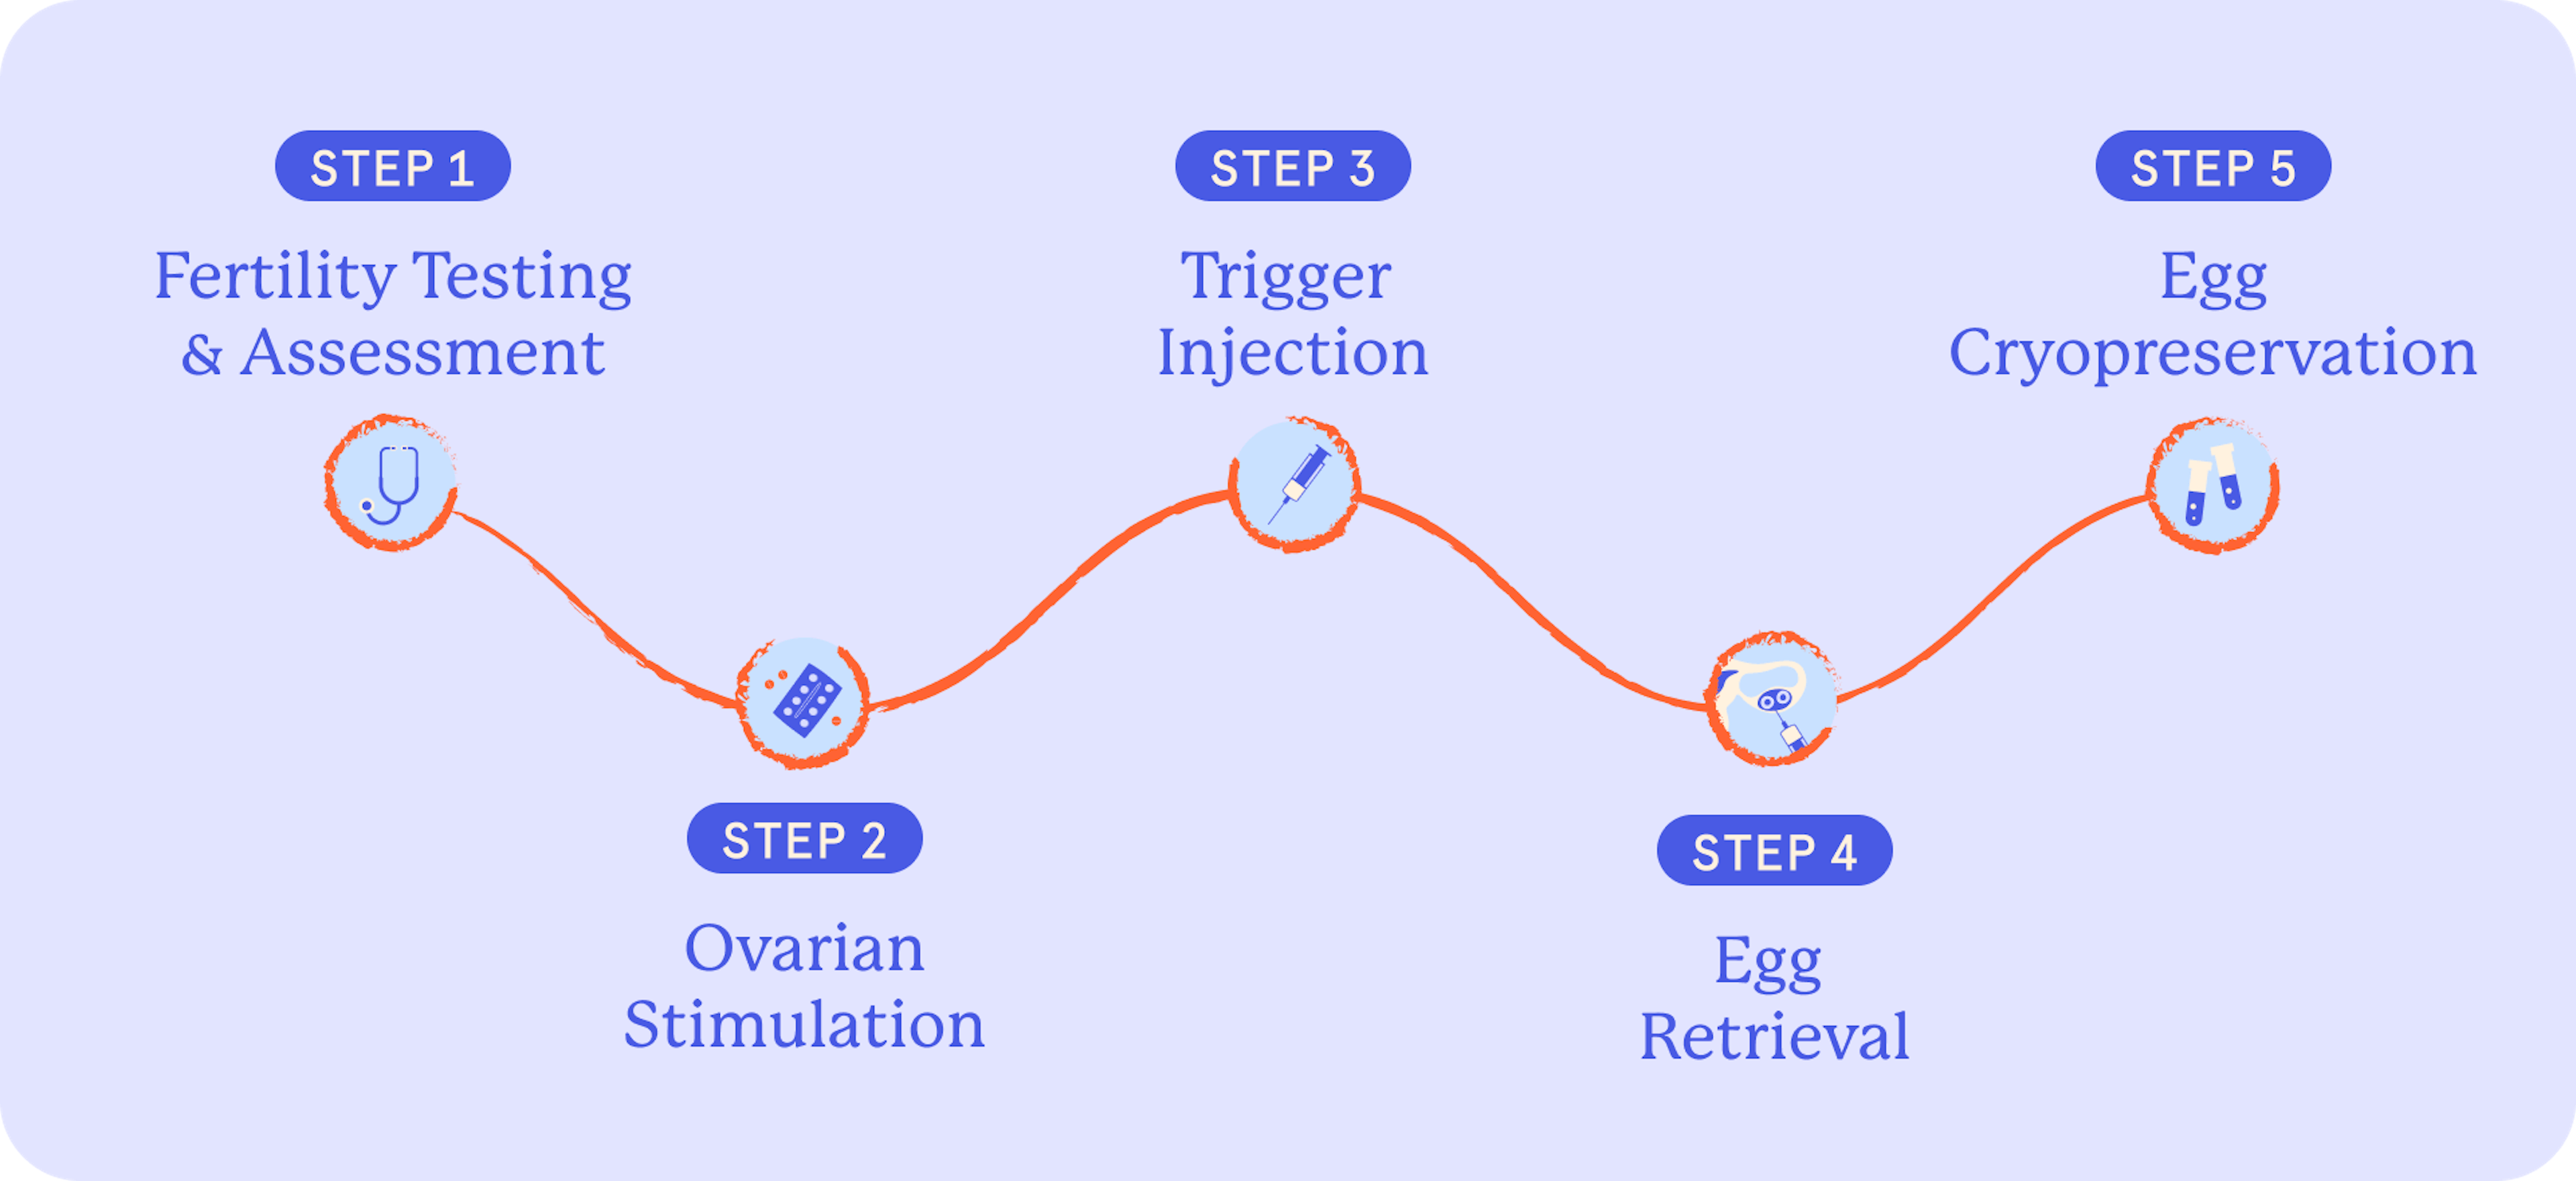 A timeline of the egg freezing process